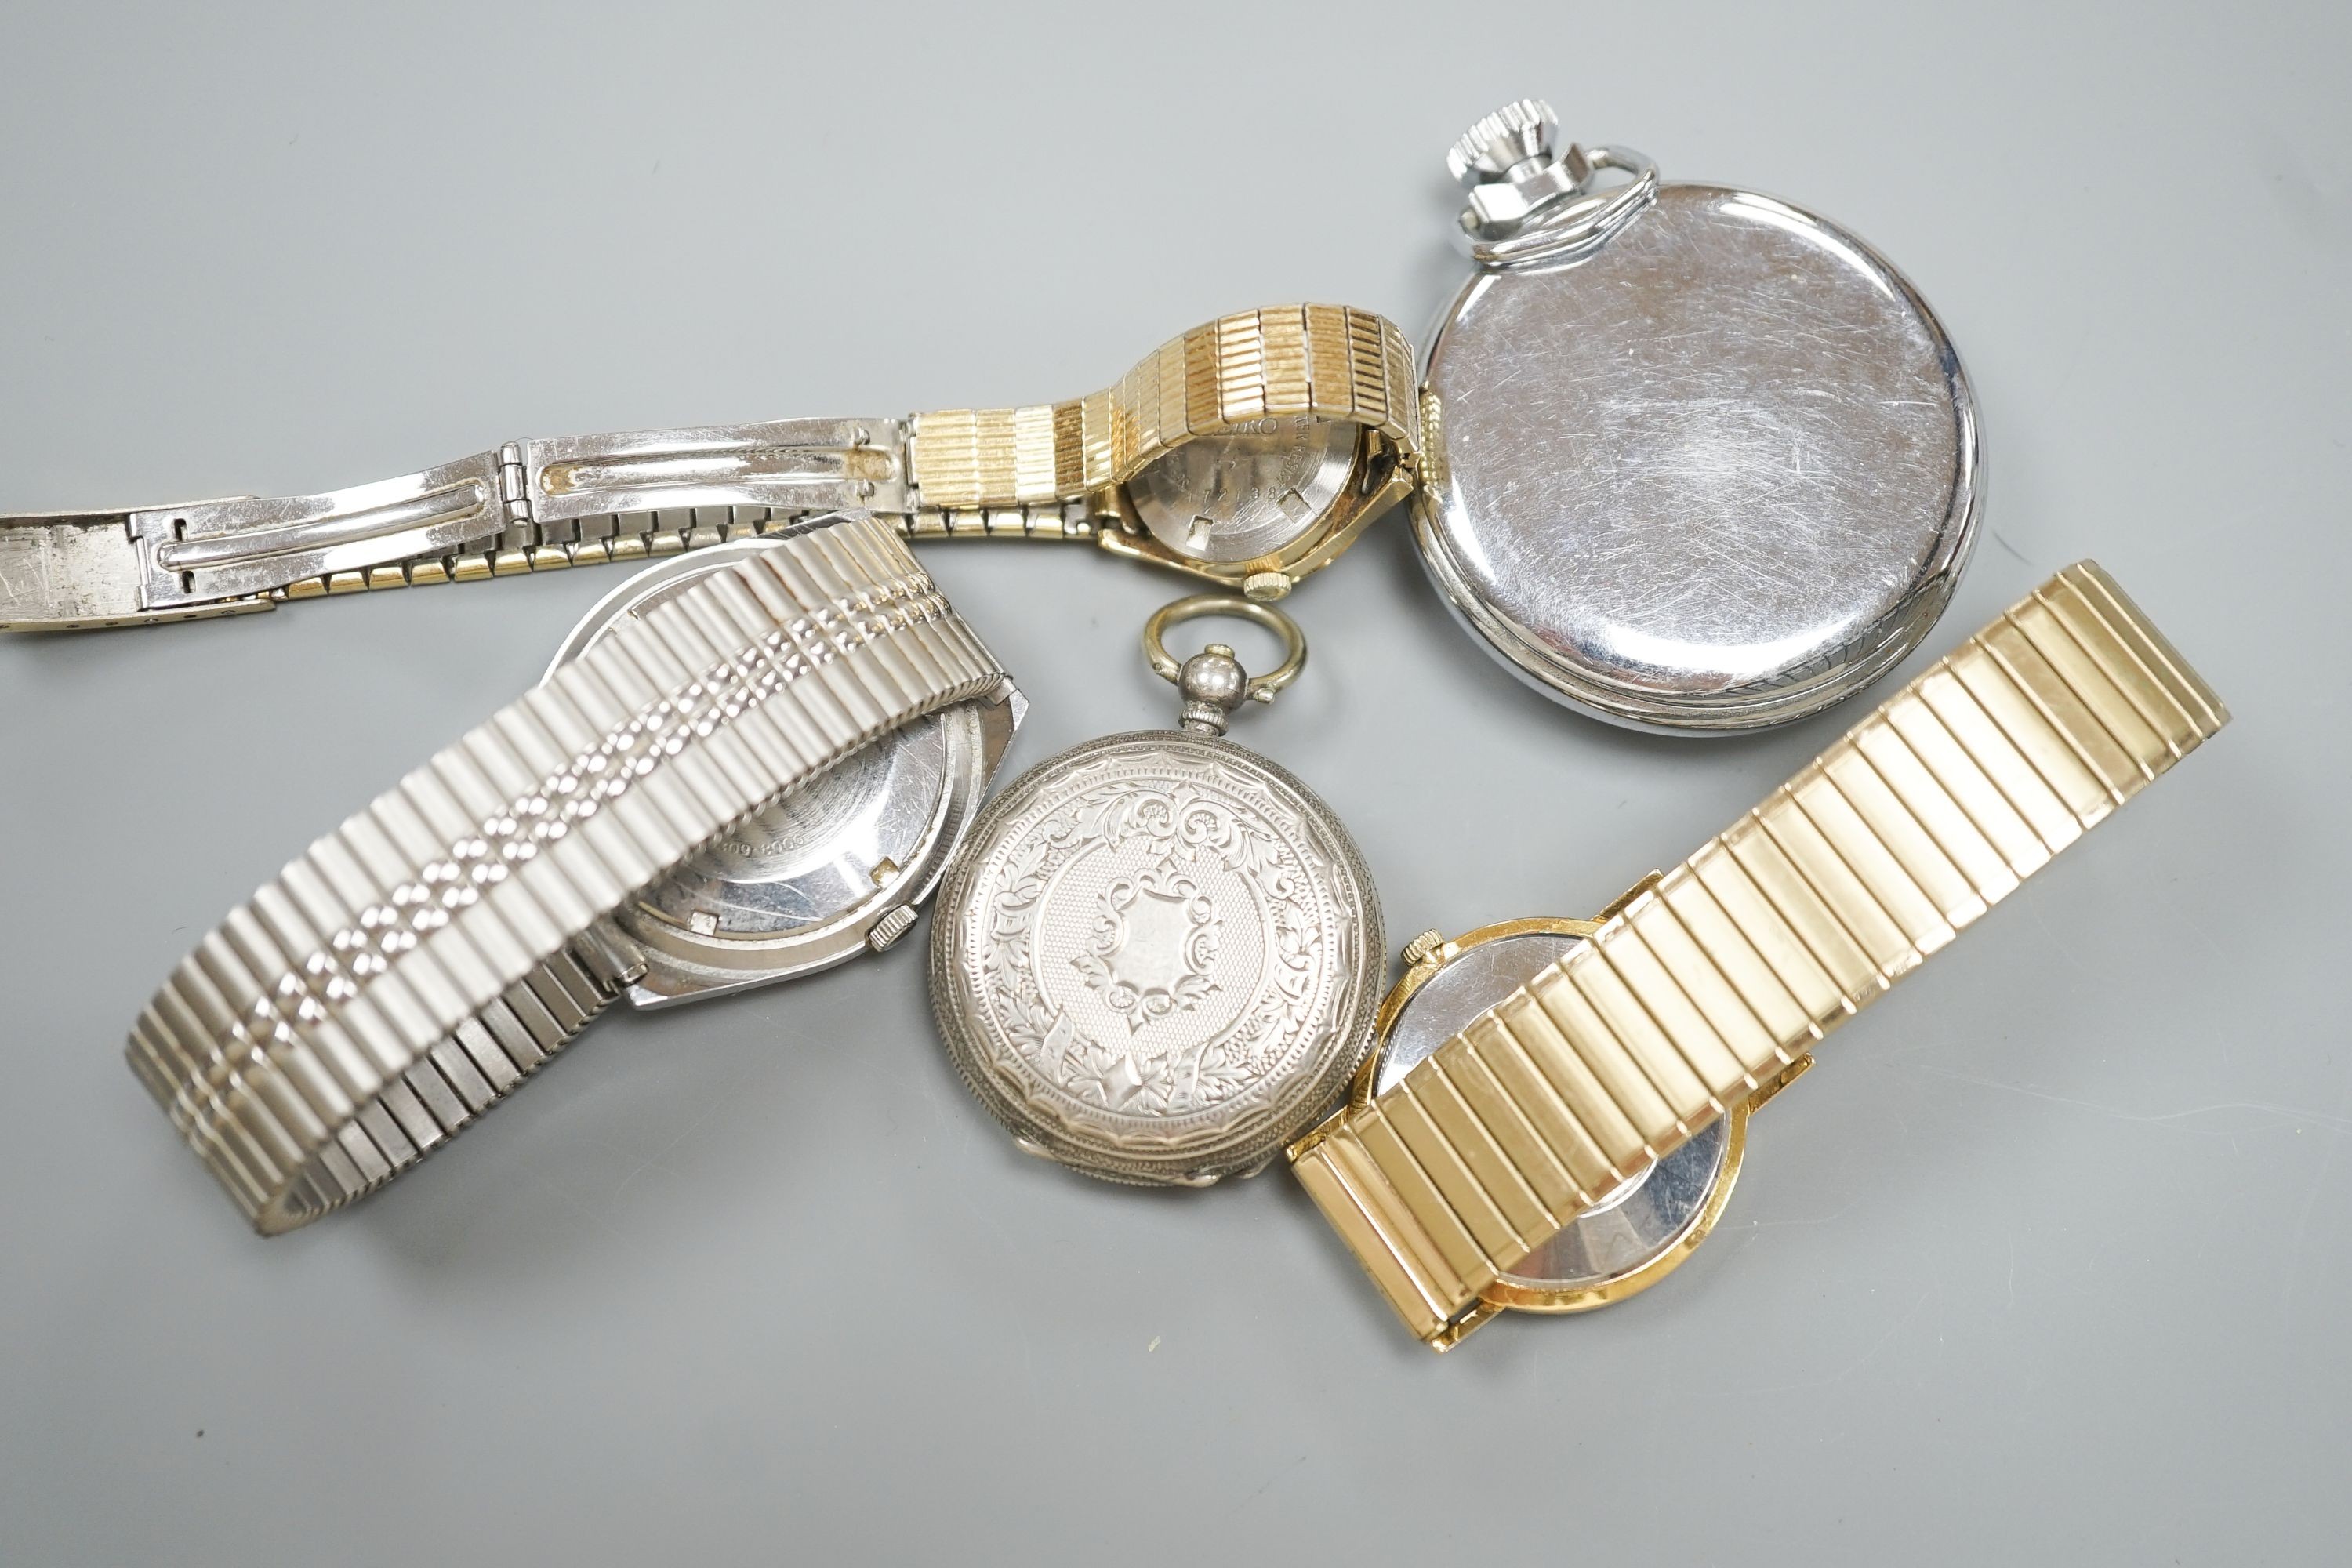 A chrome cased Guinness Time pocket watch, two wrist watches including Favre-Leuba and an 800 fob watch.